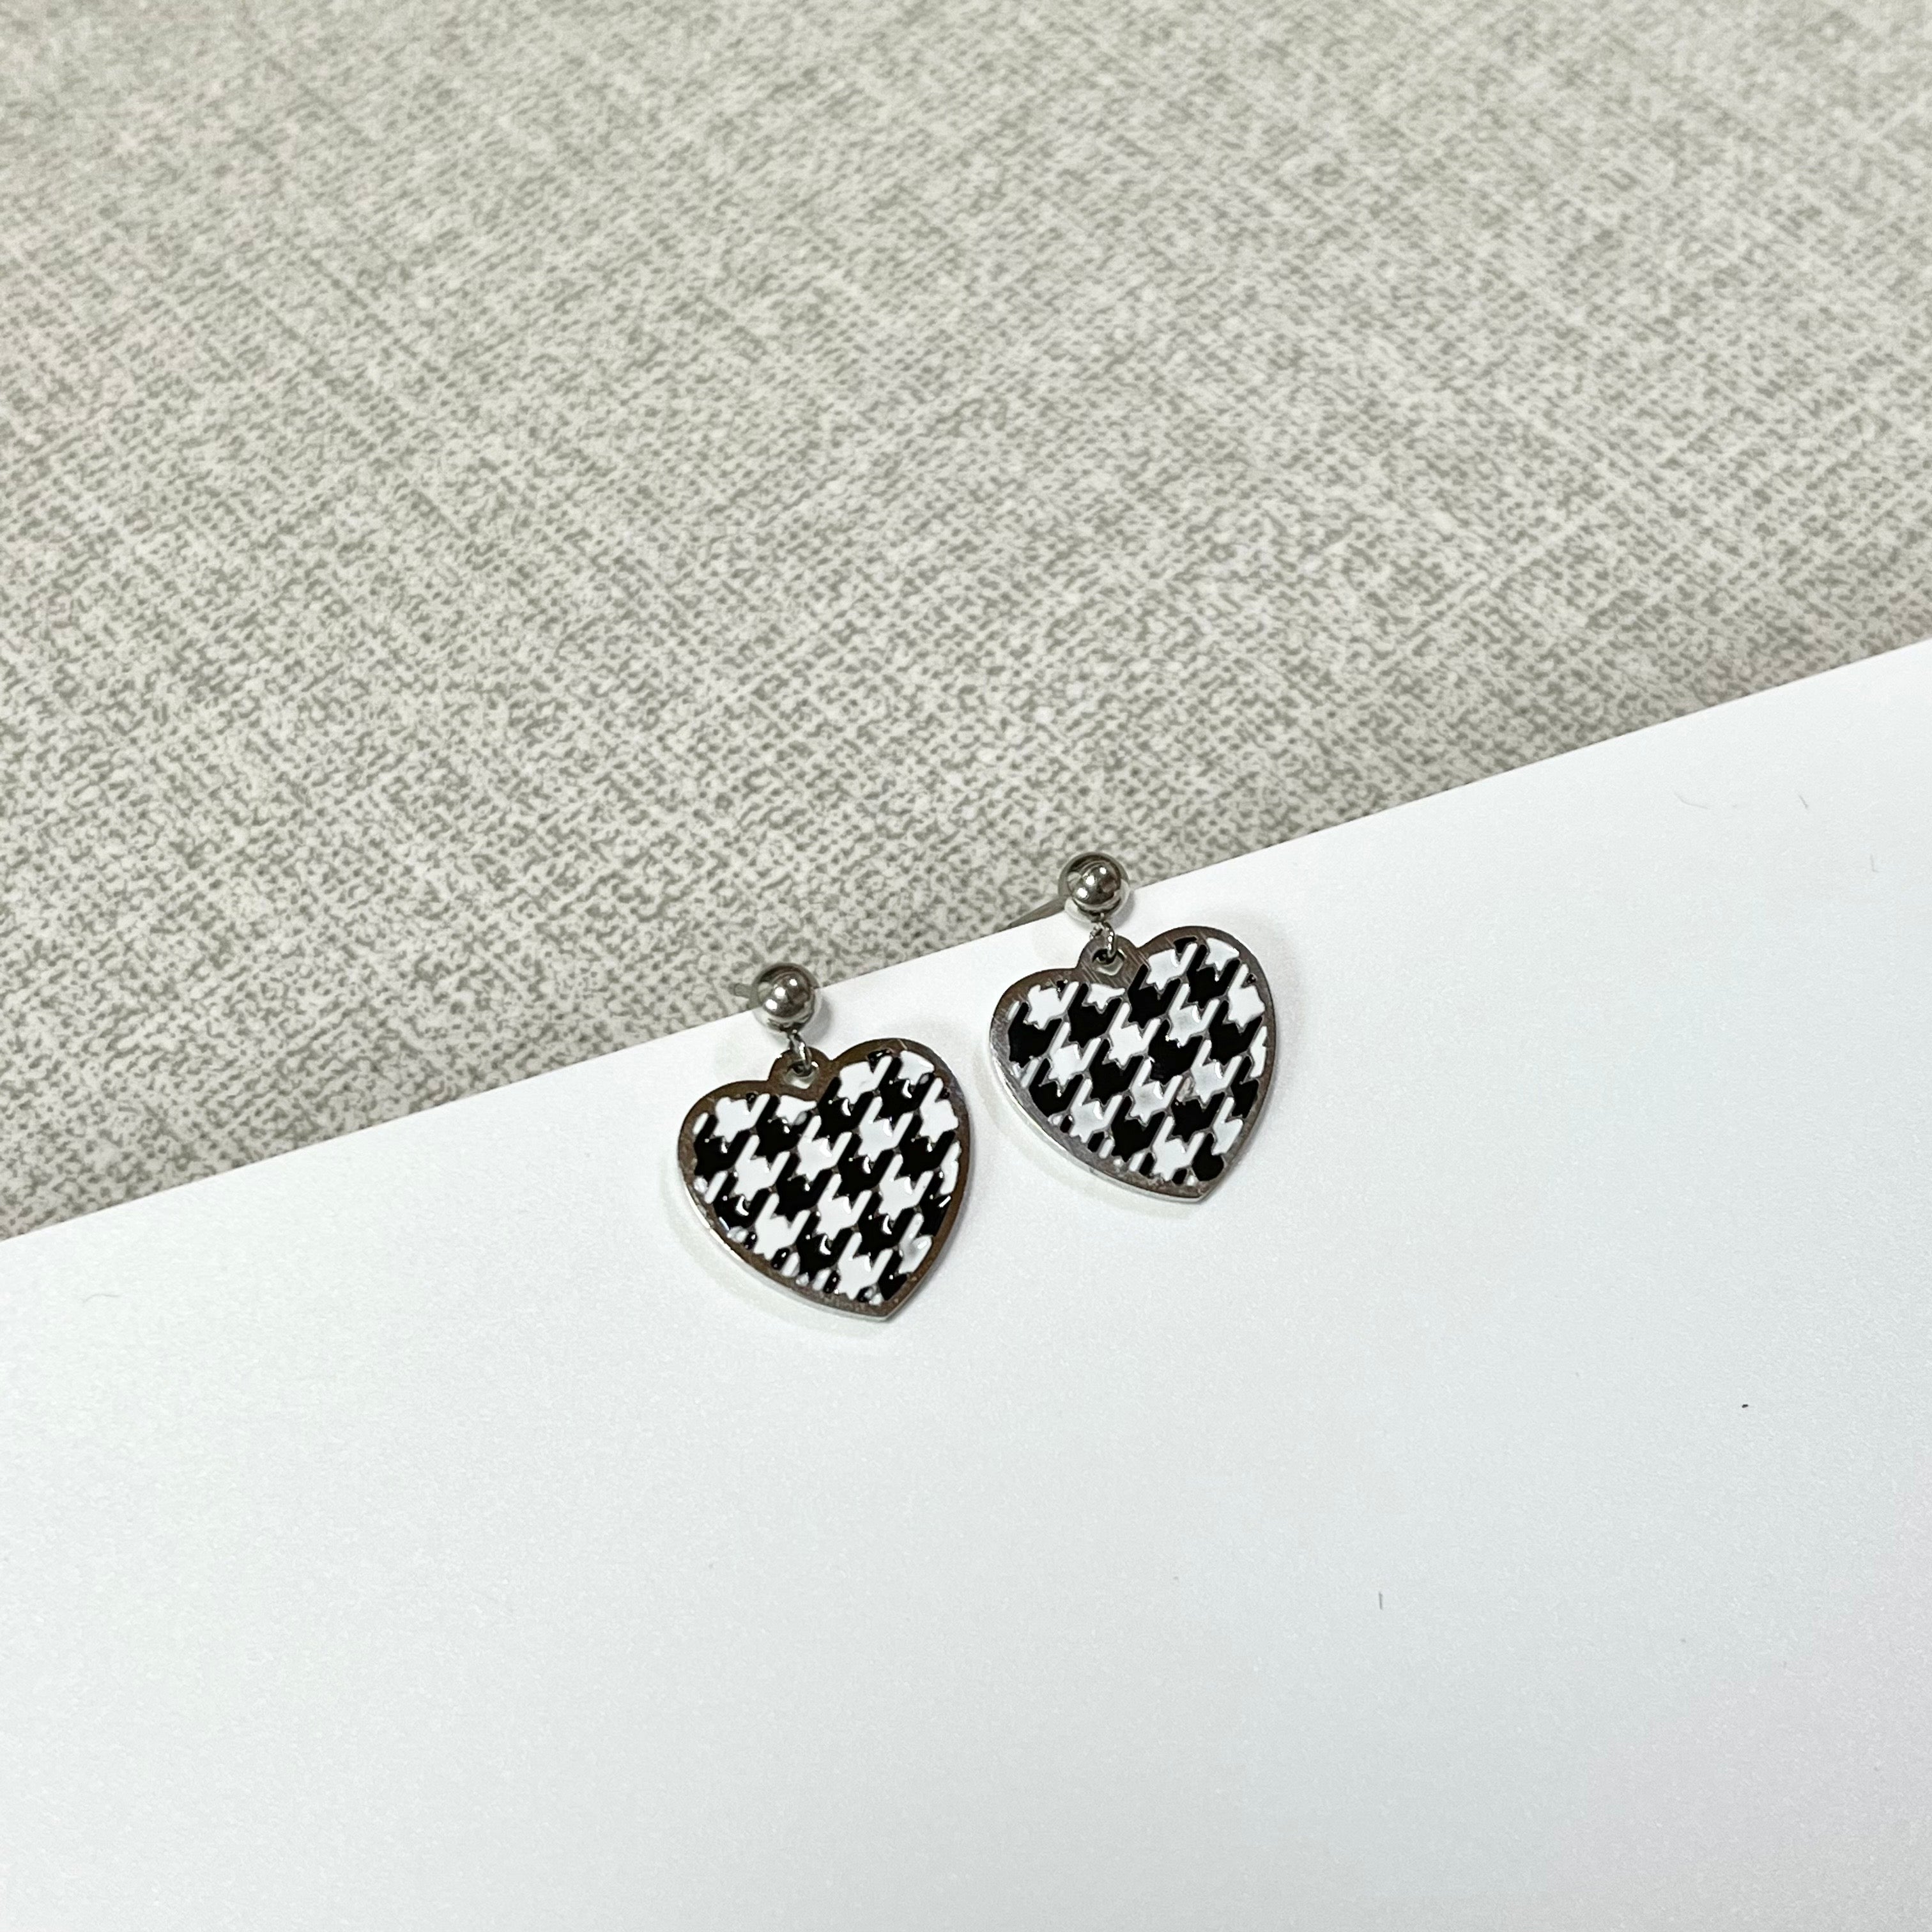 MADE check Earring